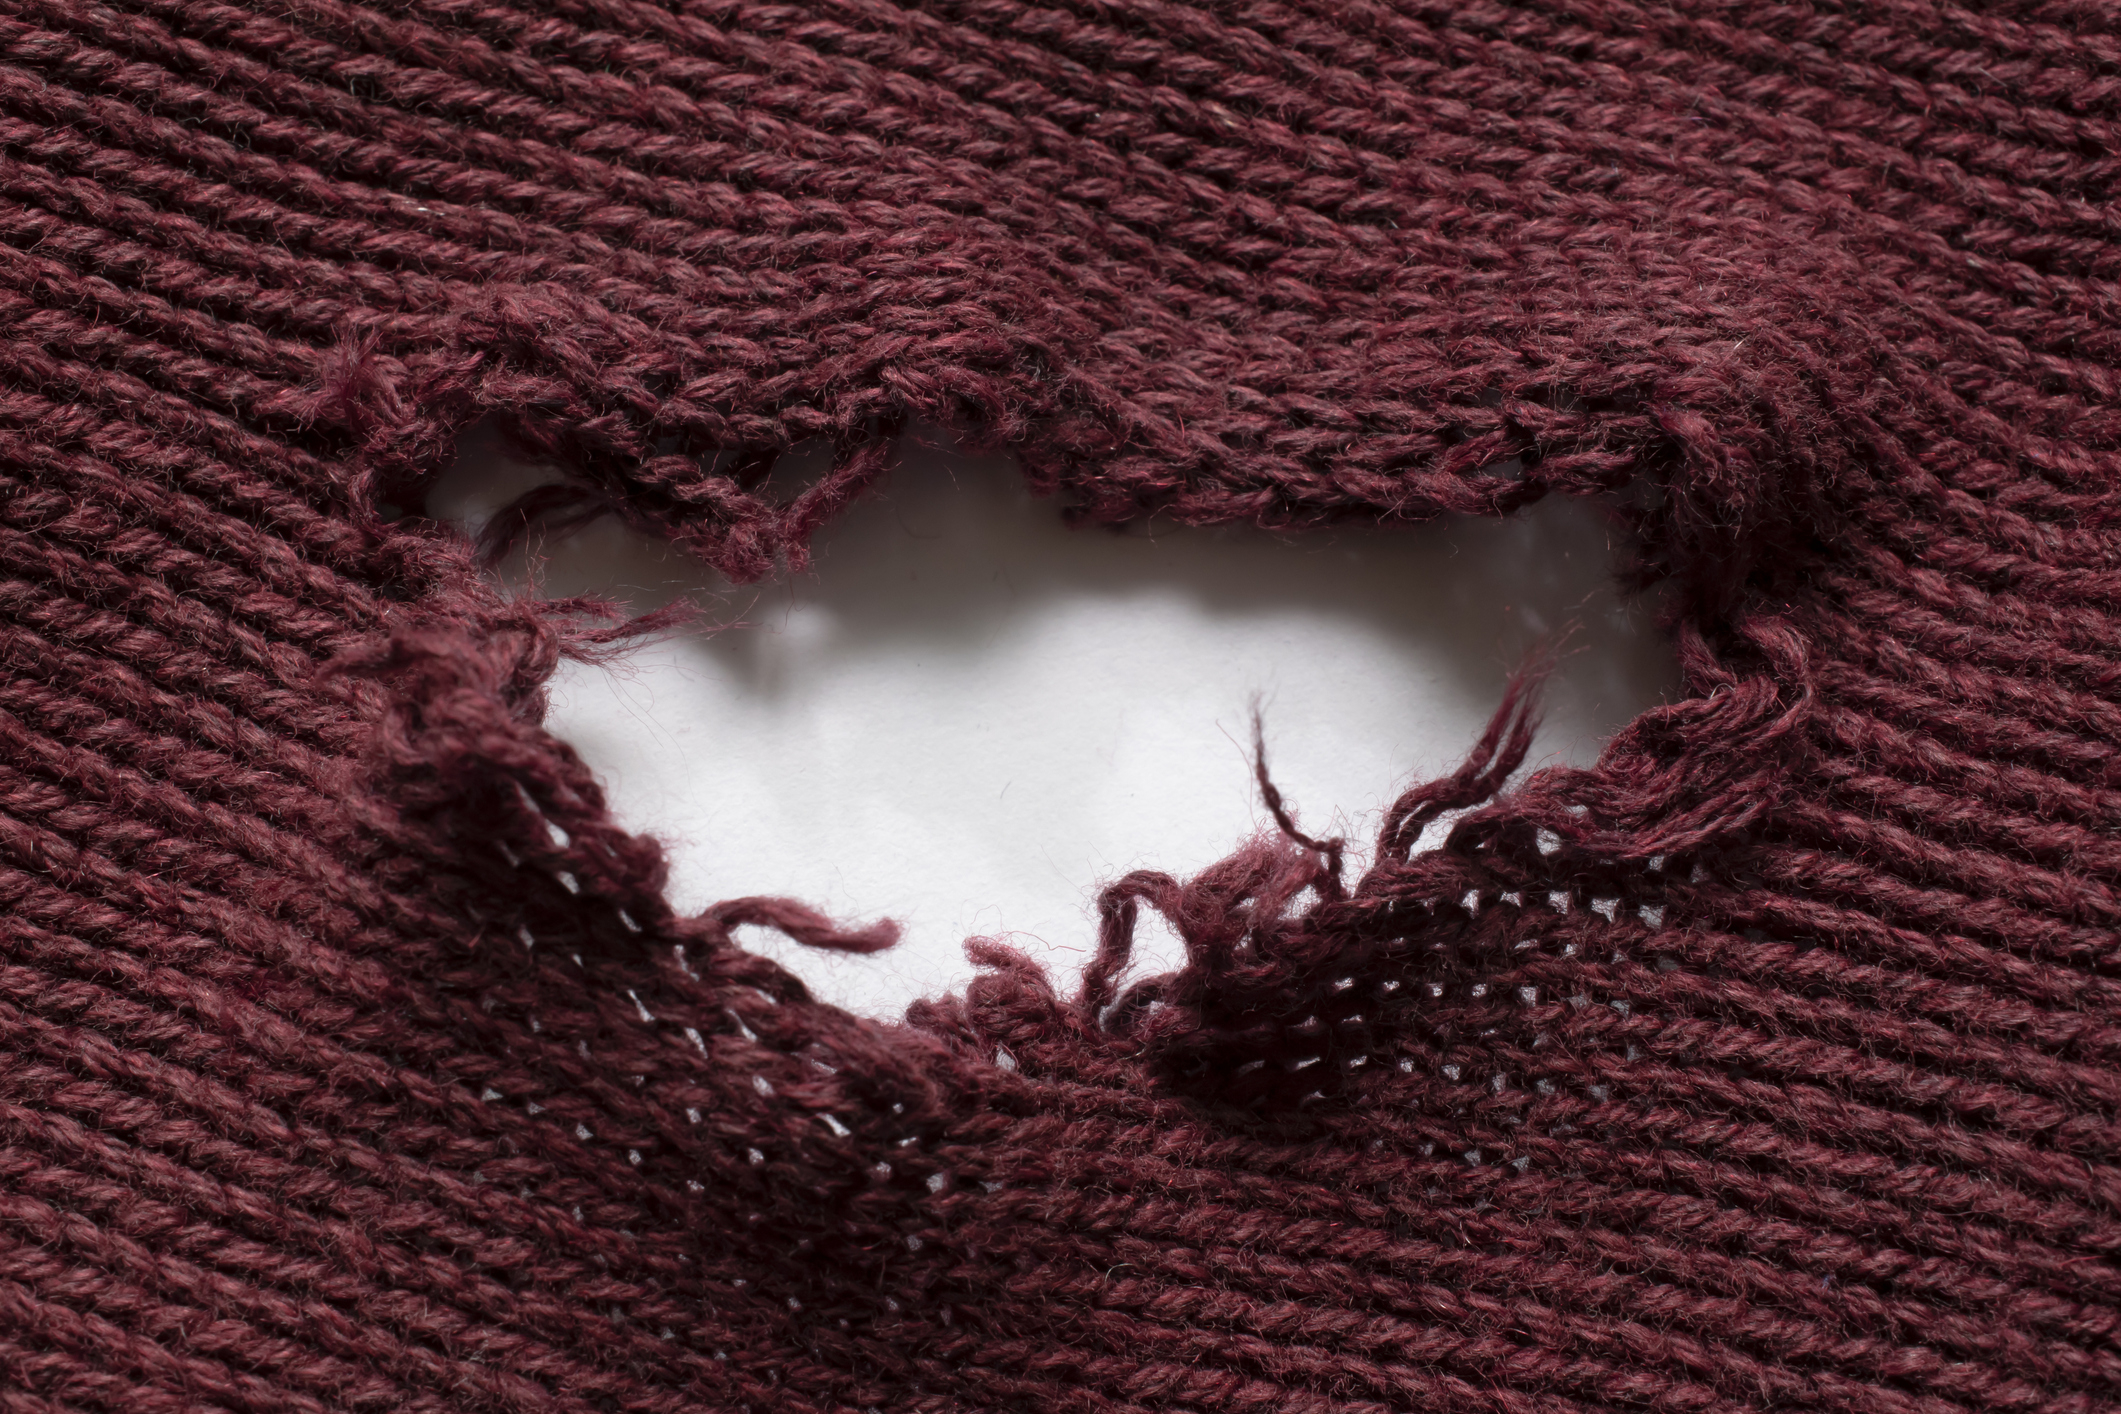 A close-up of a torn knit fabric revealing a white background